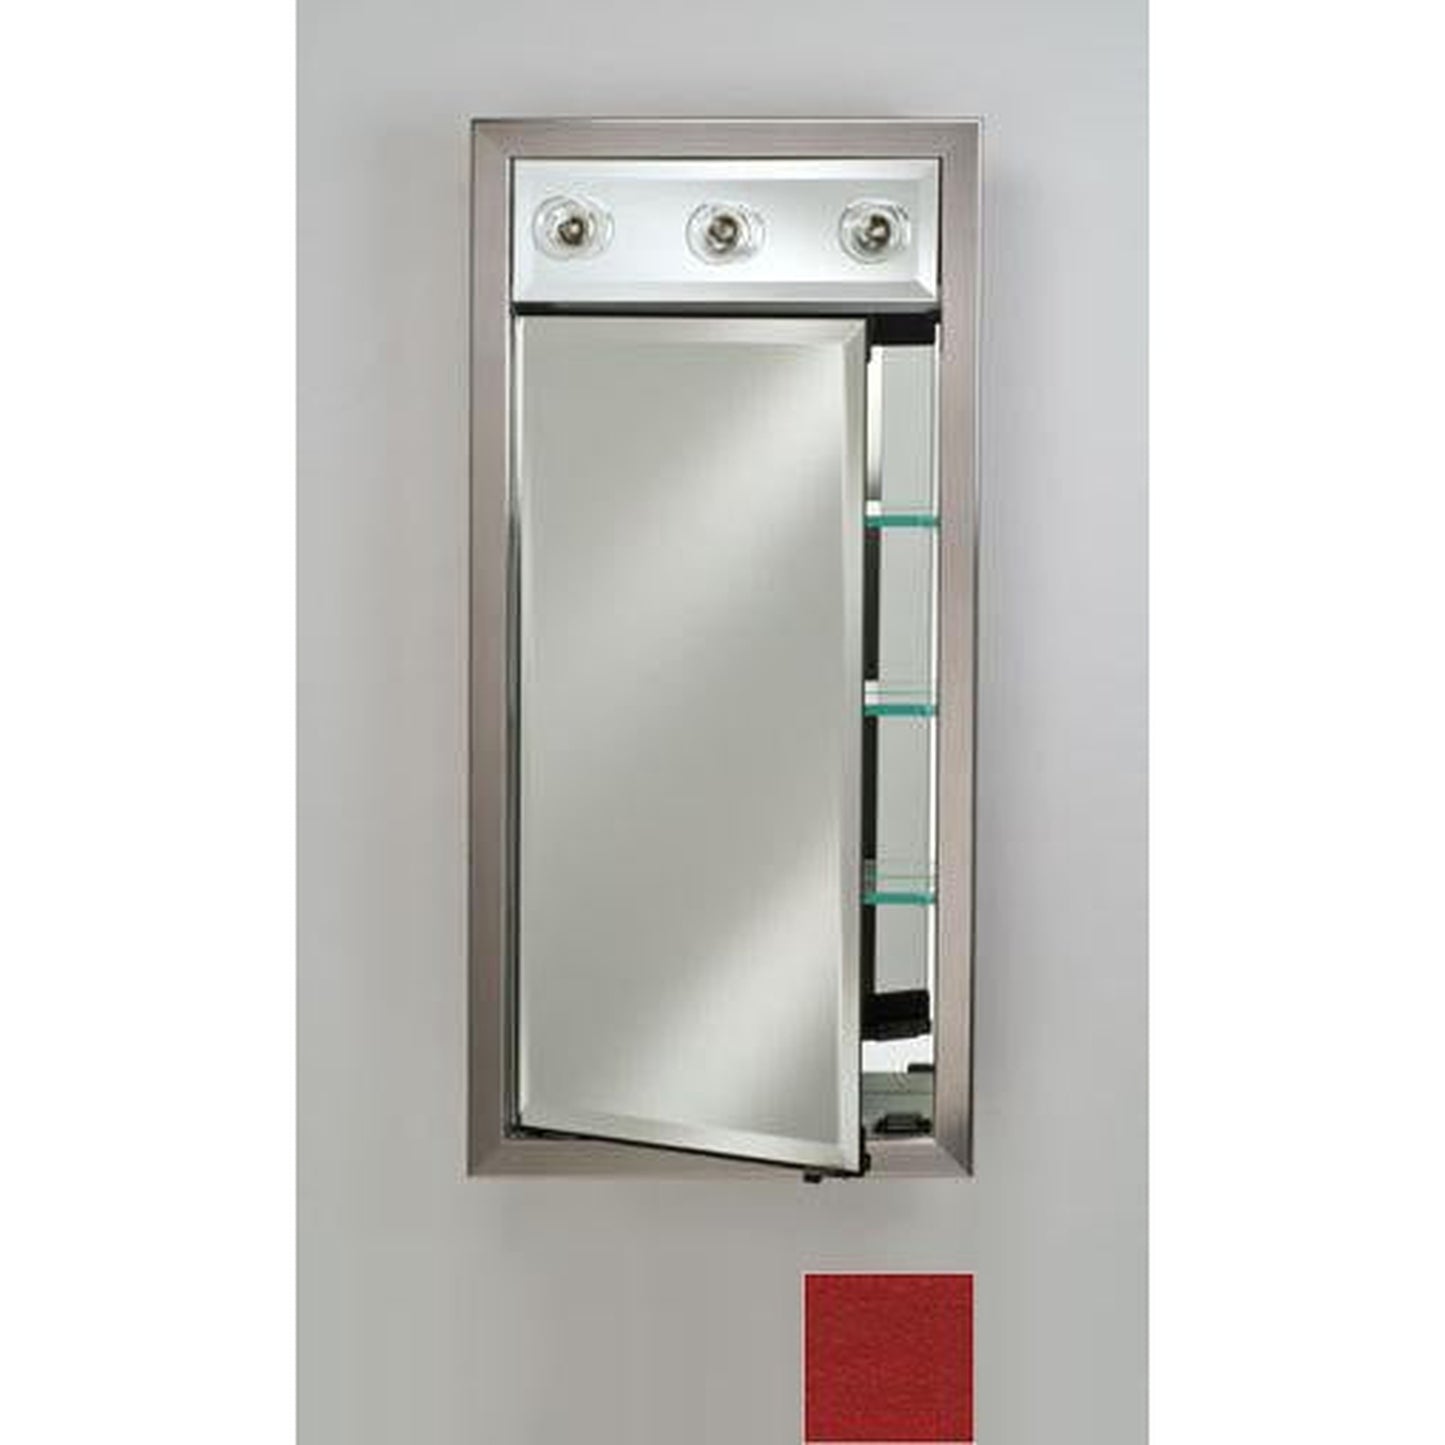 Afina Signature 17" x 30" Colorgrain Red Recessed Right Hinged Single Door Medicine Cabinet With Contemporary Lights